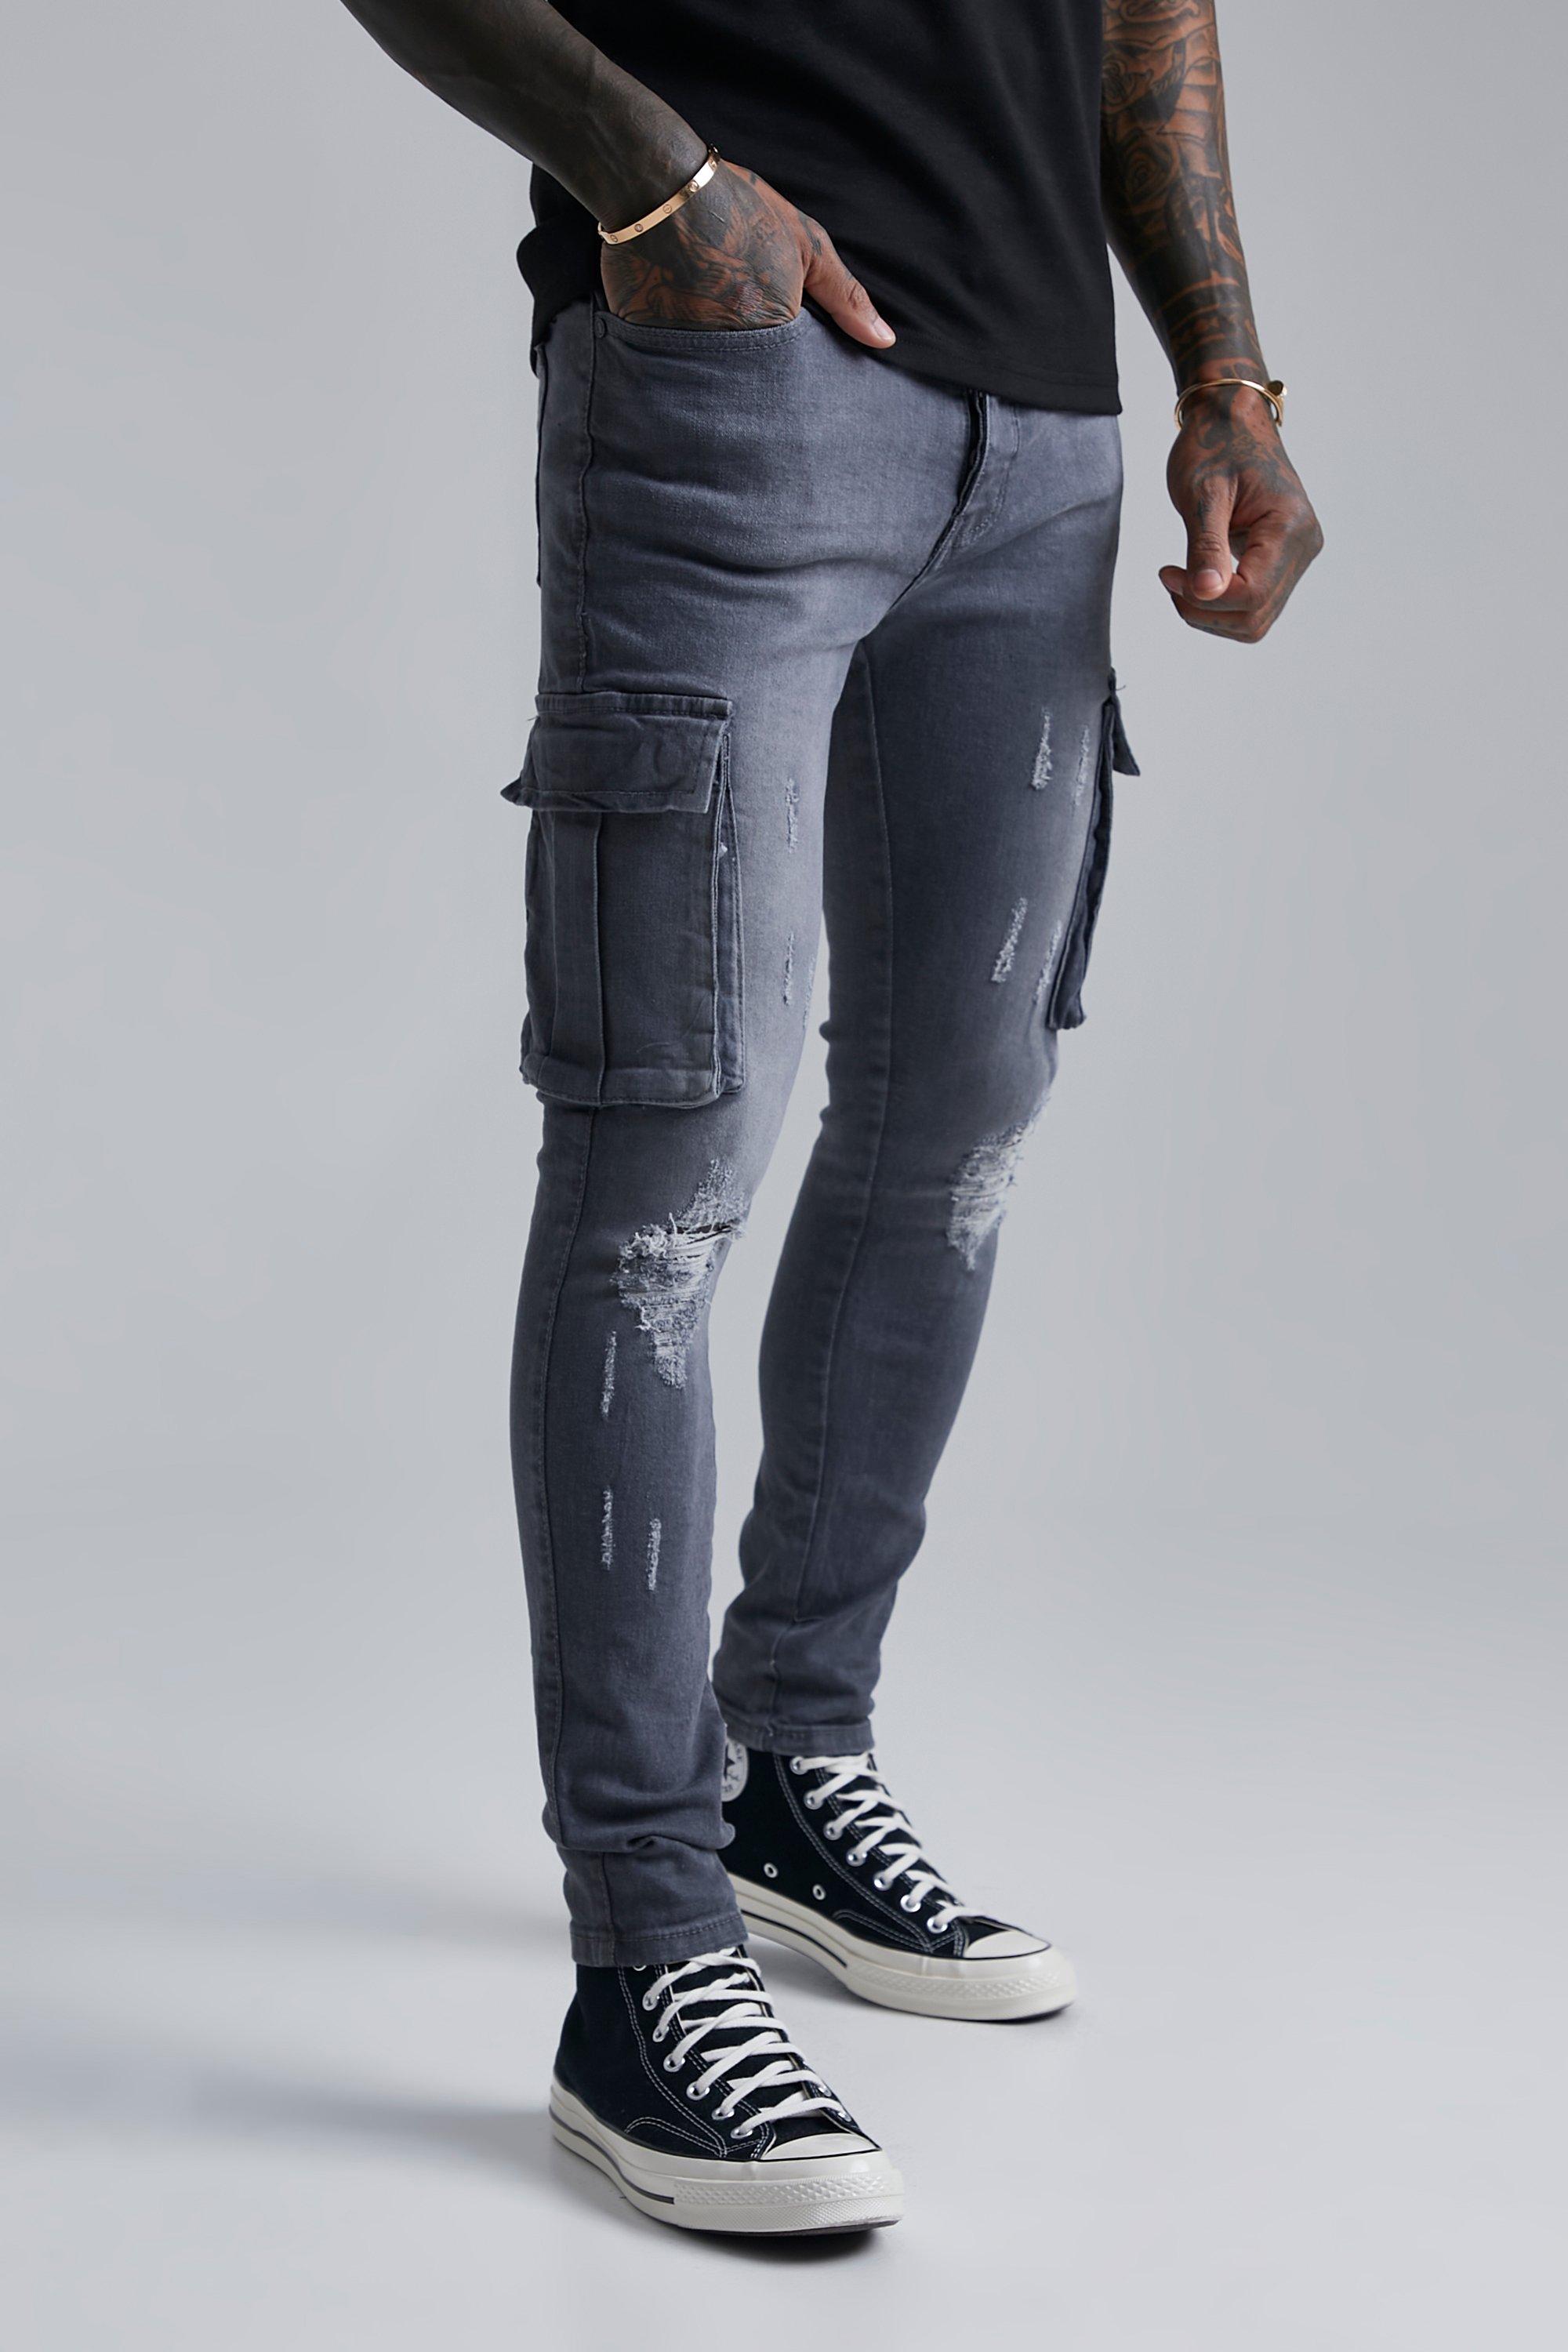 akavet to uger Modernisering Super Skinny Cargo Jeans With Knee Rips | boohooMAN USA